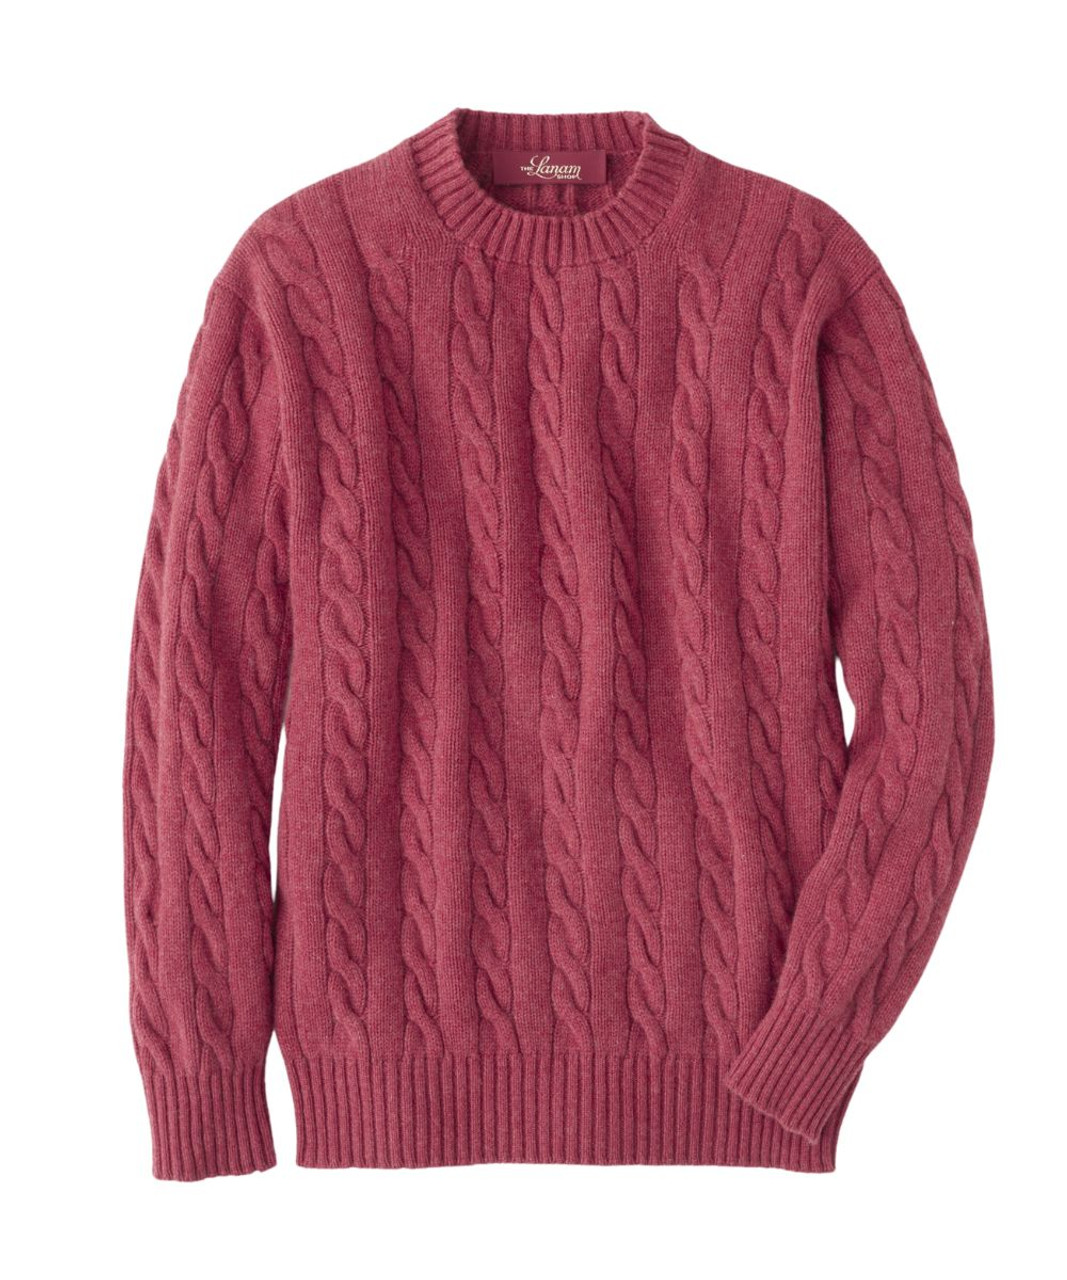 Cashmere Cable Knit Sweater, luxury fashion